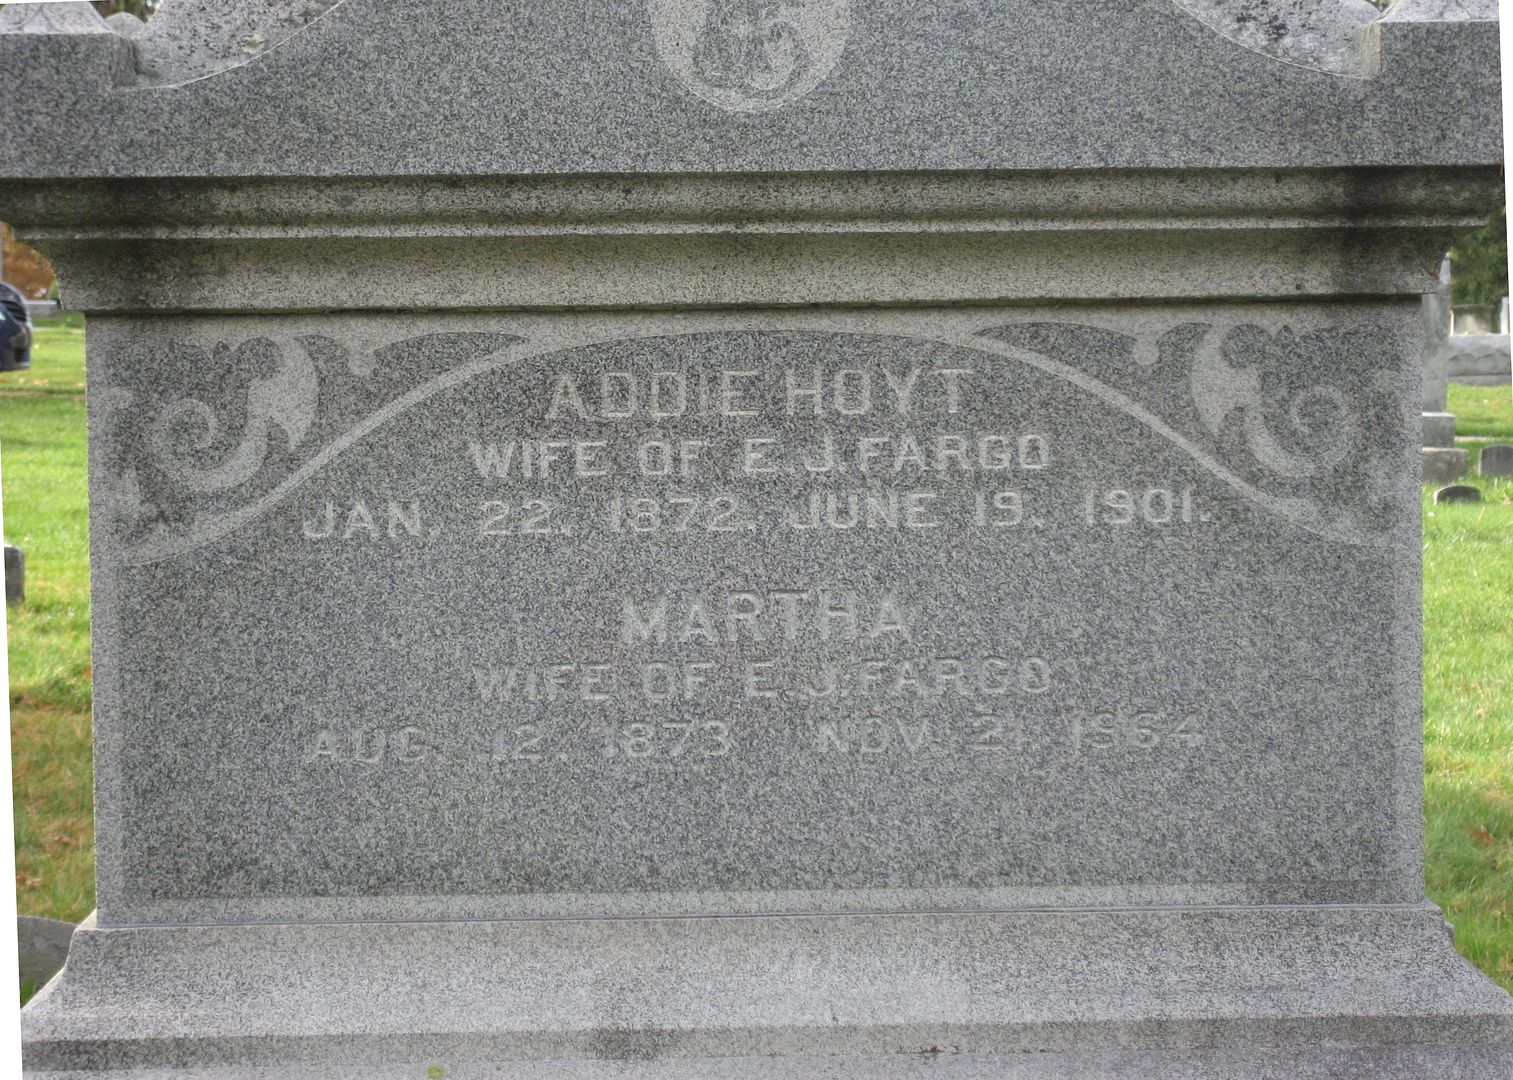 Addie Hoyts remains were removed on November 3rd, 2011. She was Enoch Fargos second wife. According to Enochs granddaughter (Mary Wilson), Enoch killed Addie. 